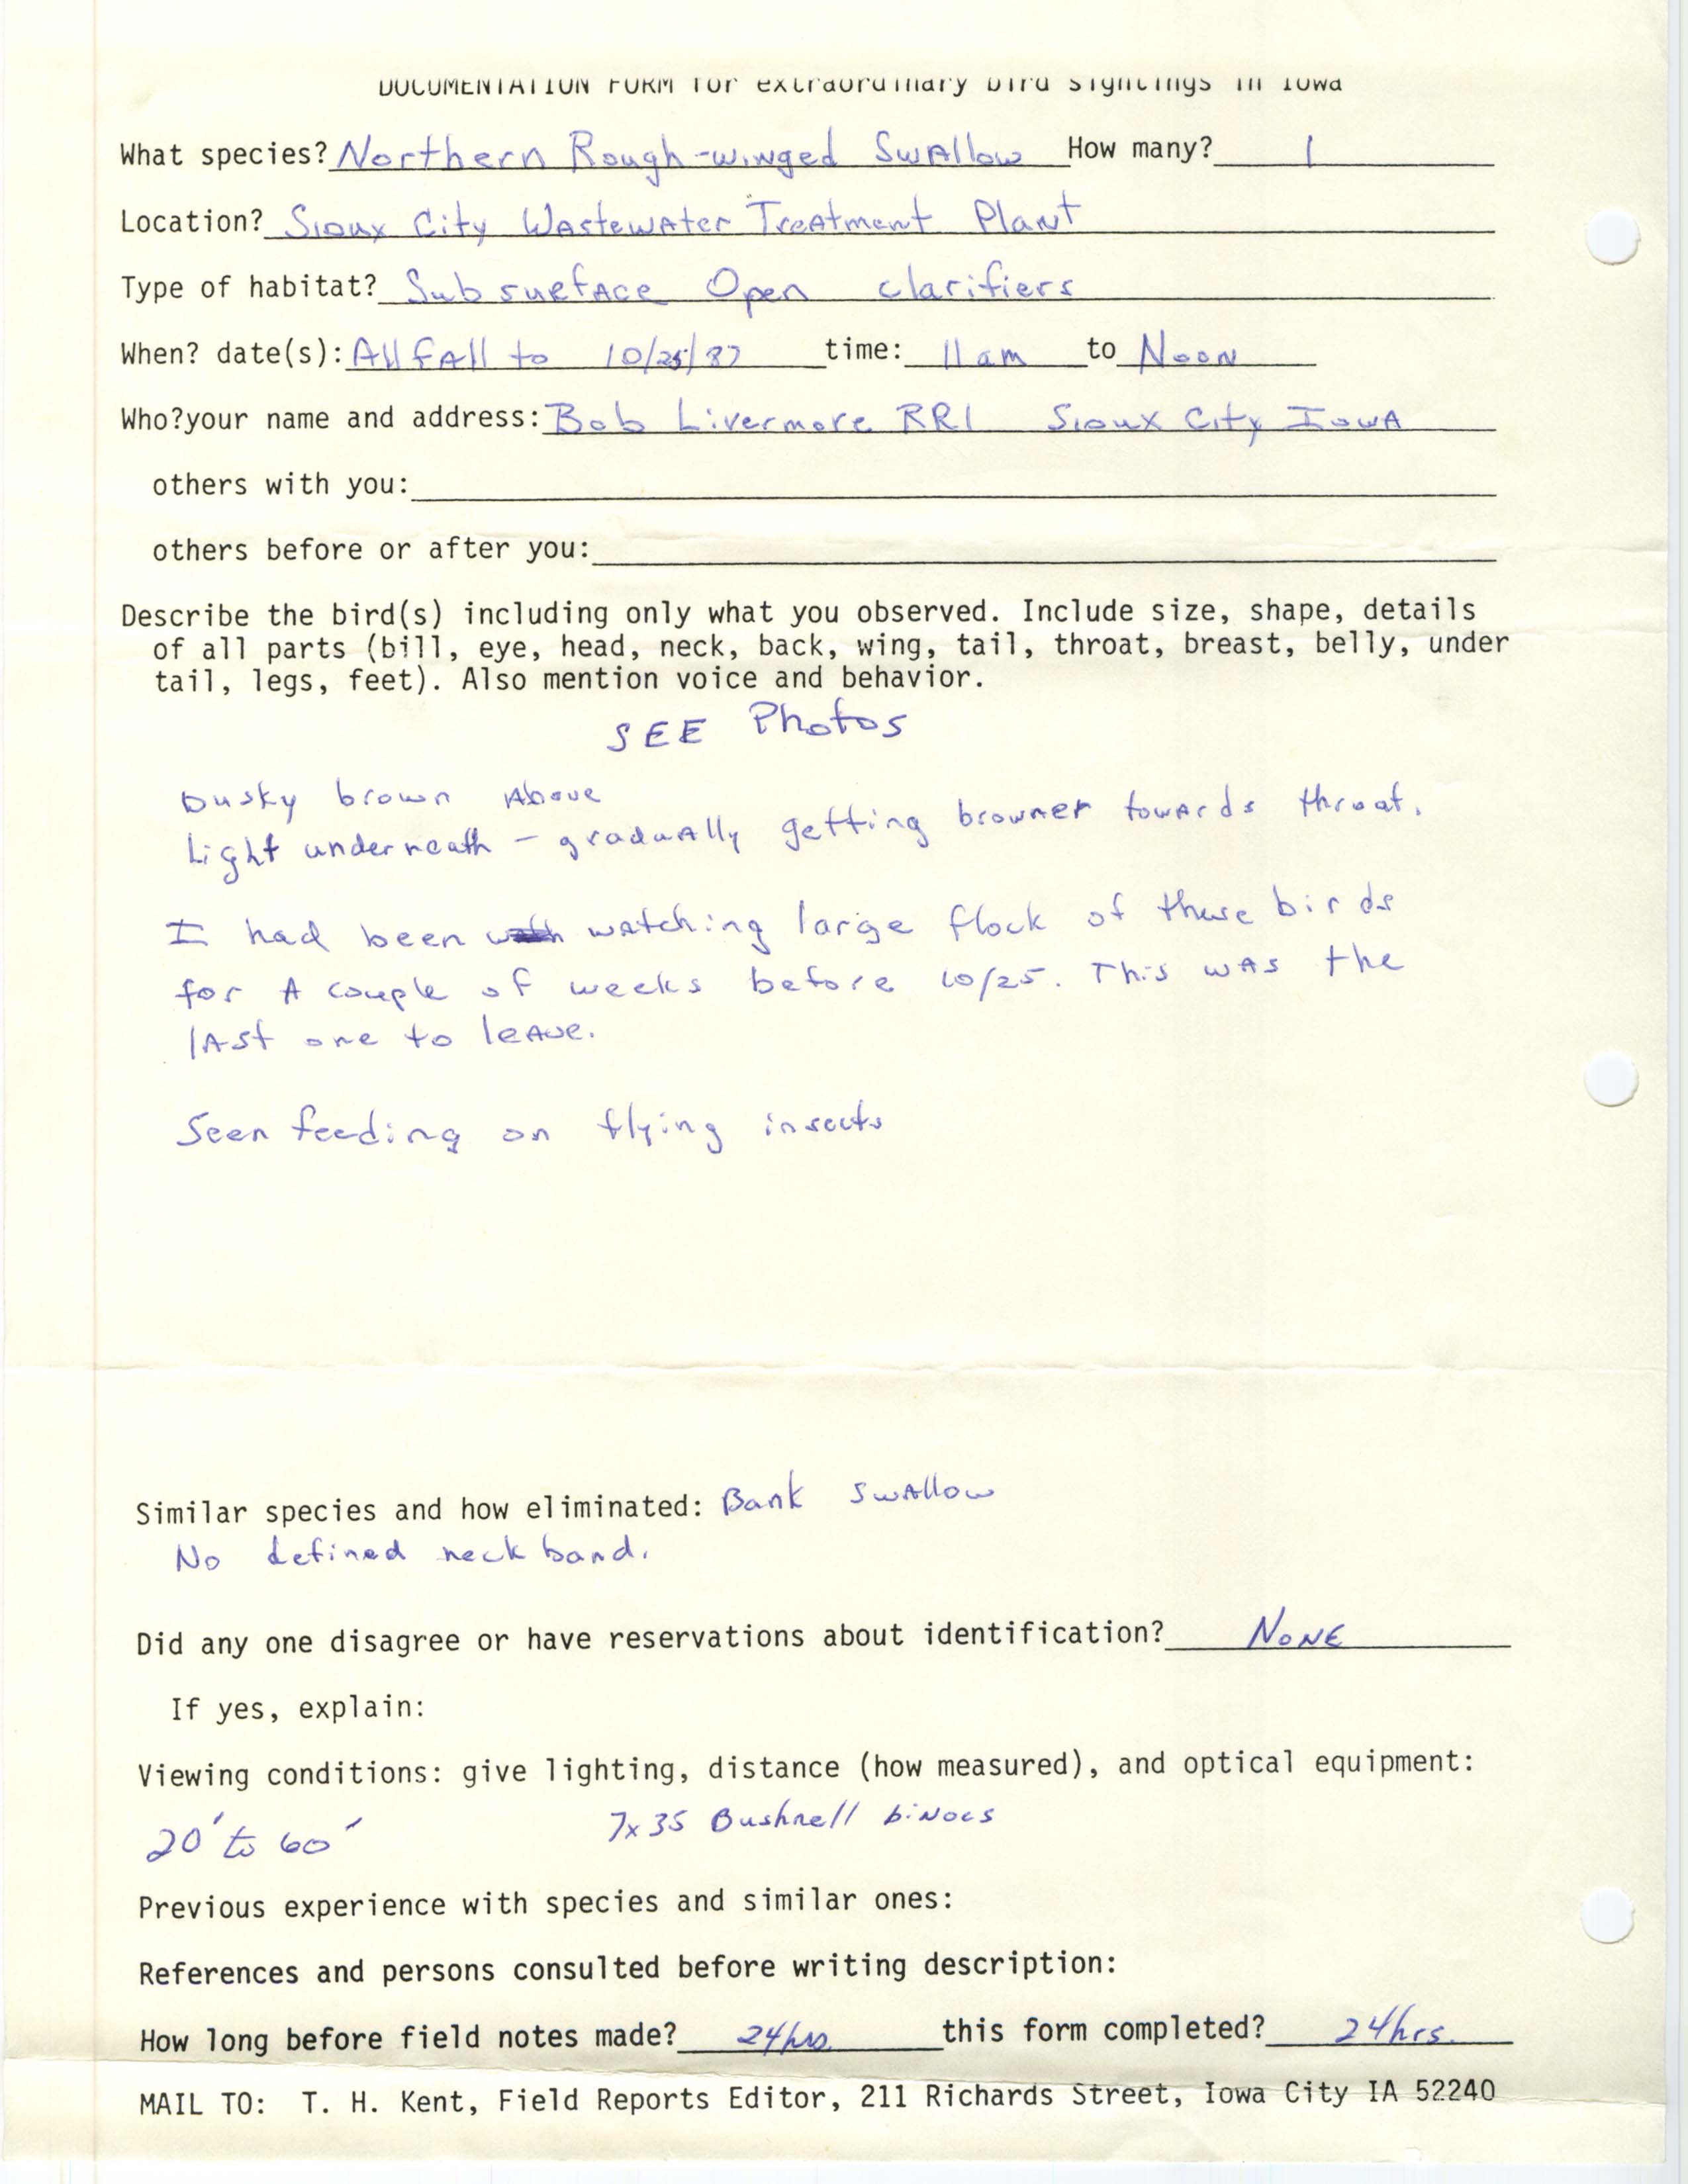 Rare bird documentation form for Northern Rough-winged Swallow at Sioux City Wastewater Treatment Plant in 1987